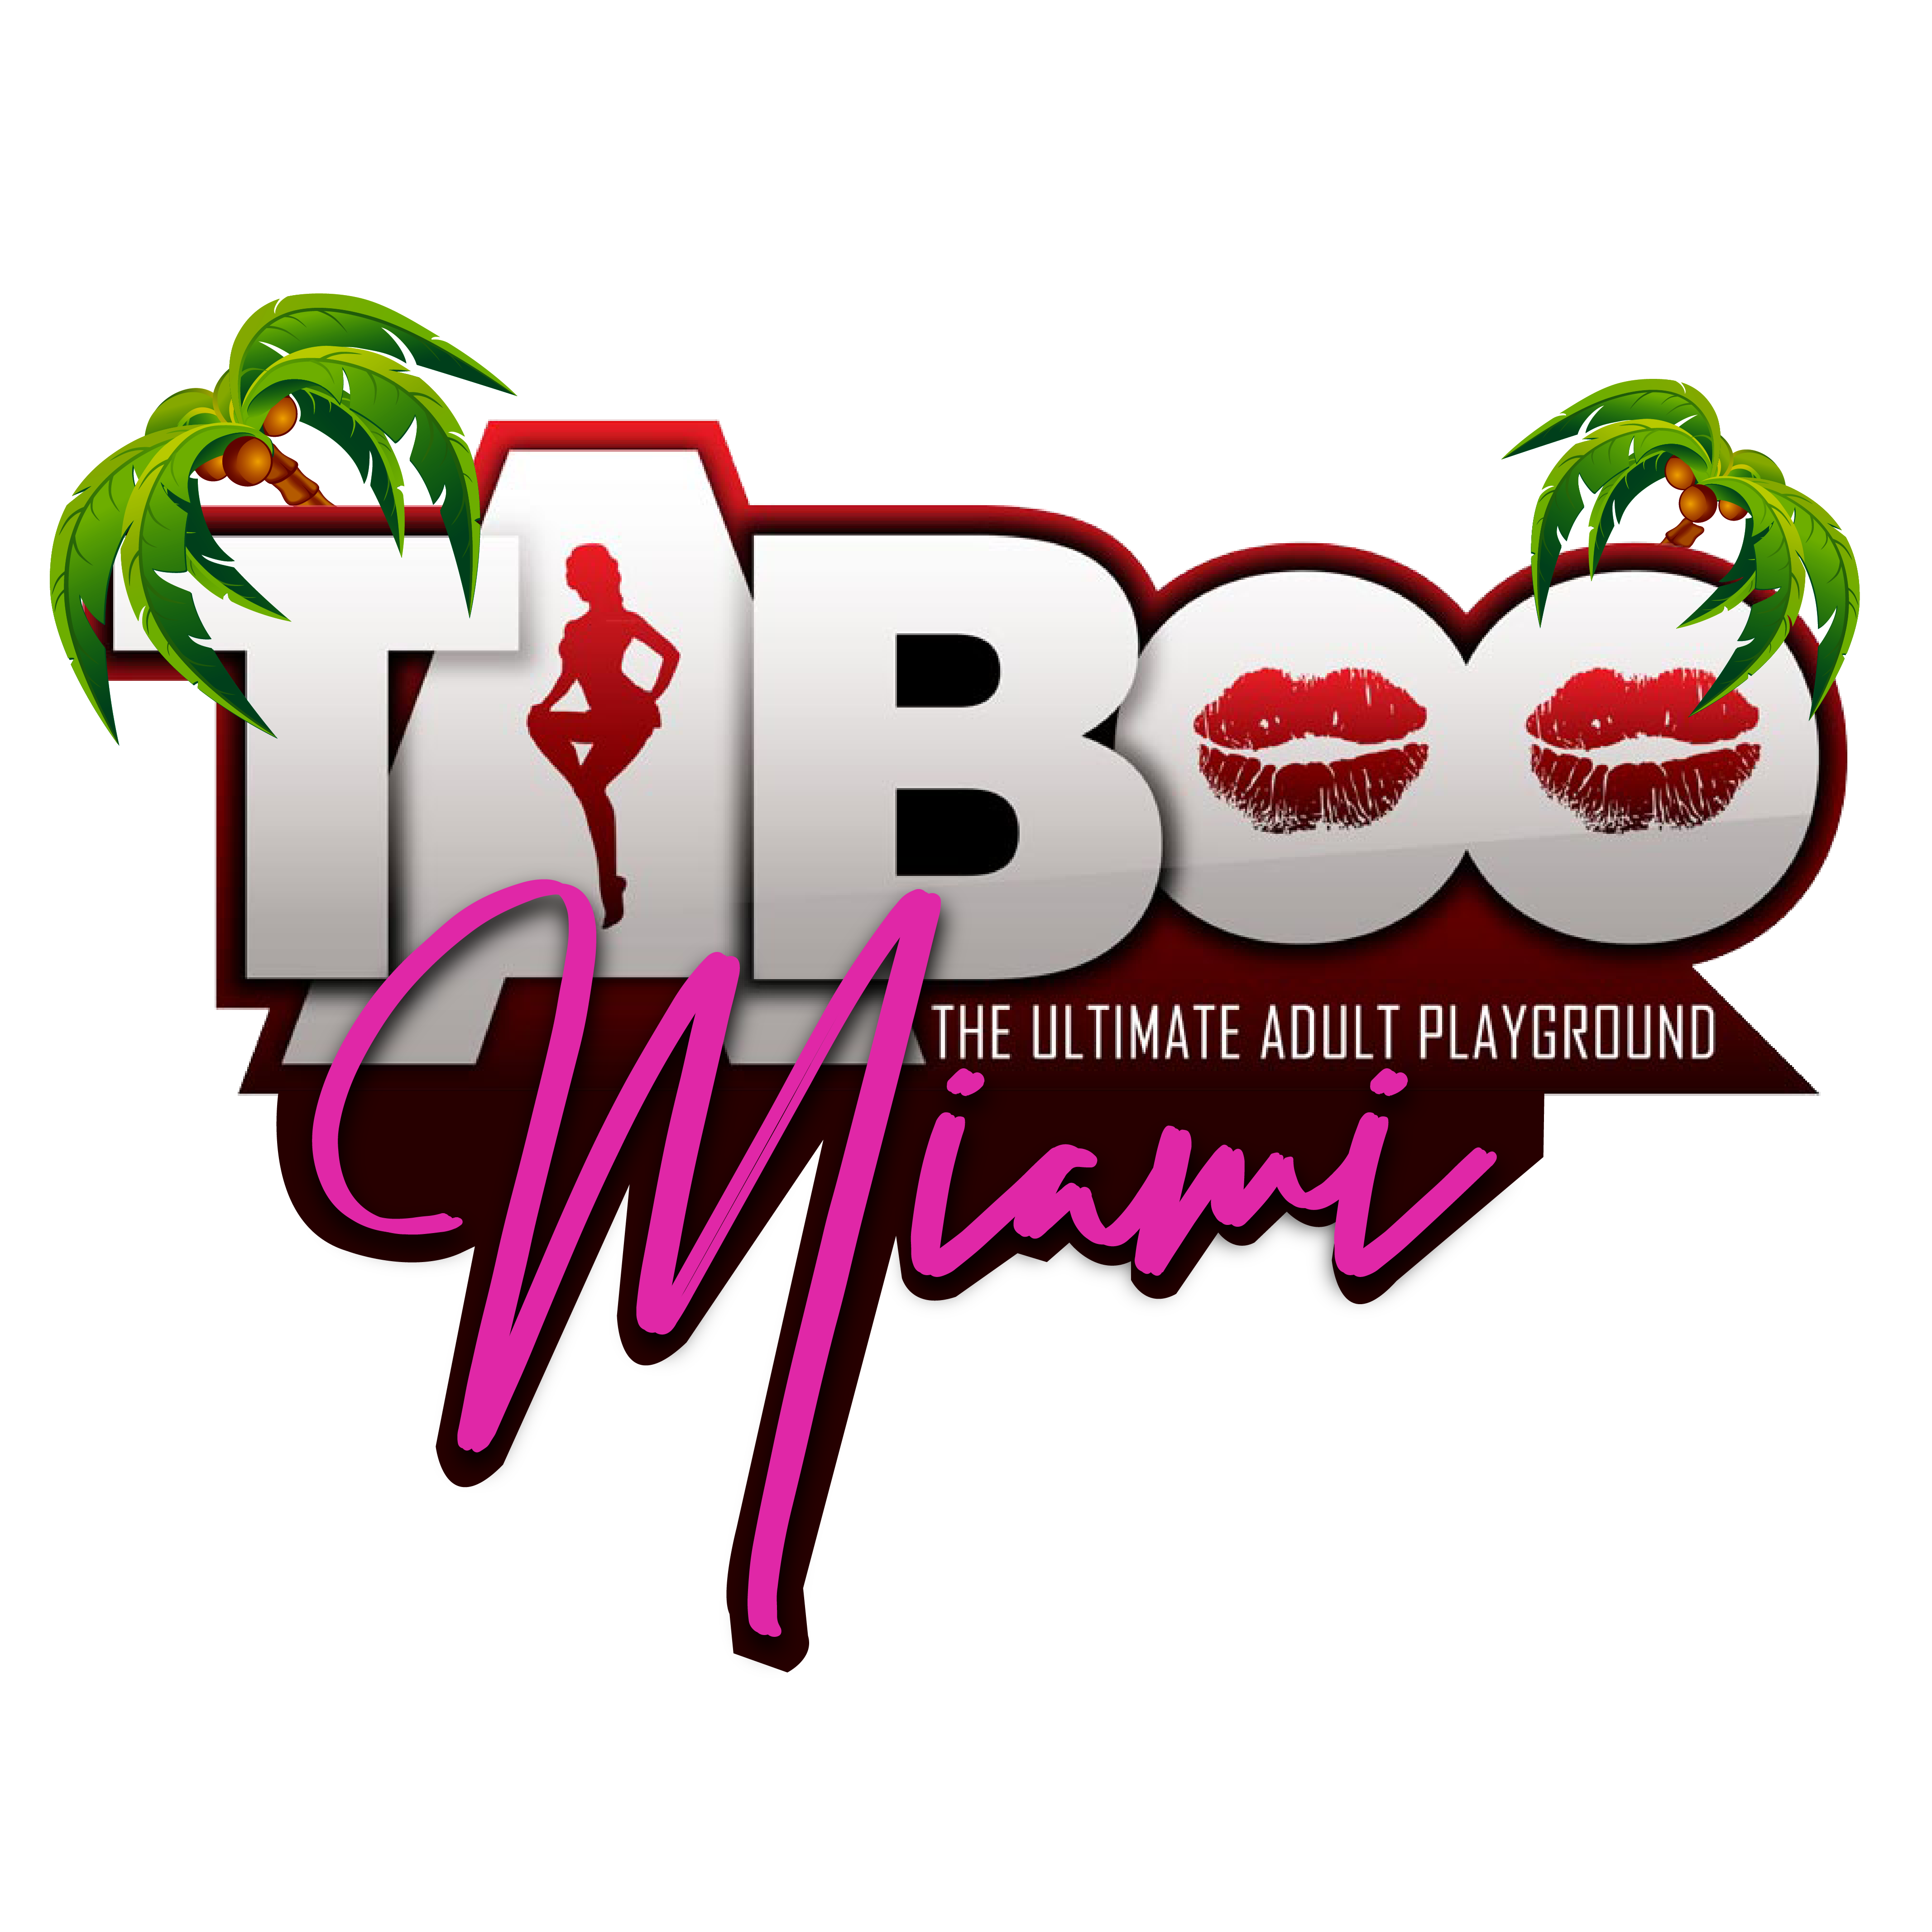 Taboo Miami by g5ive